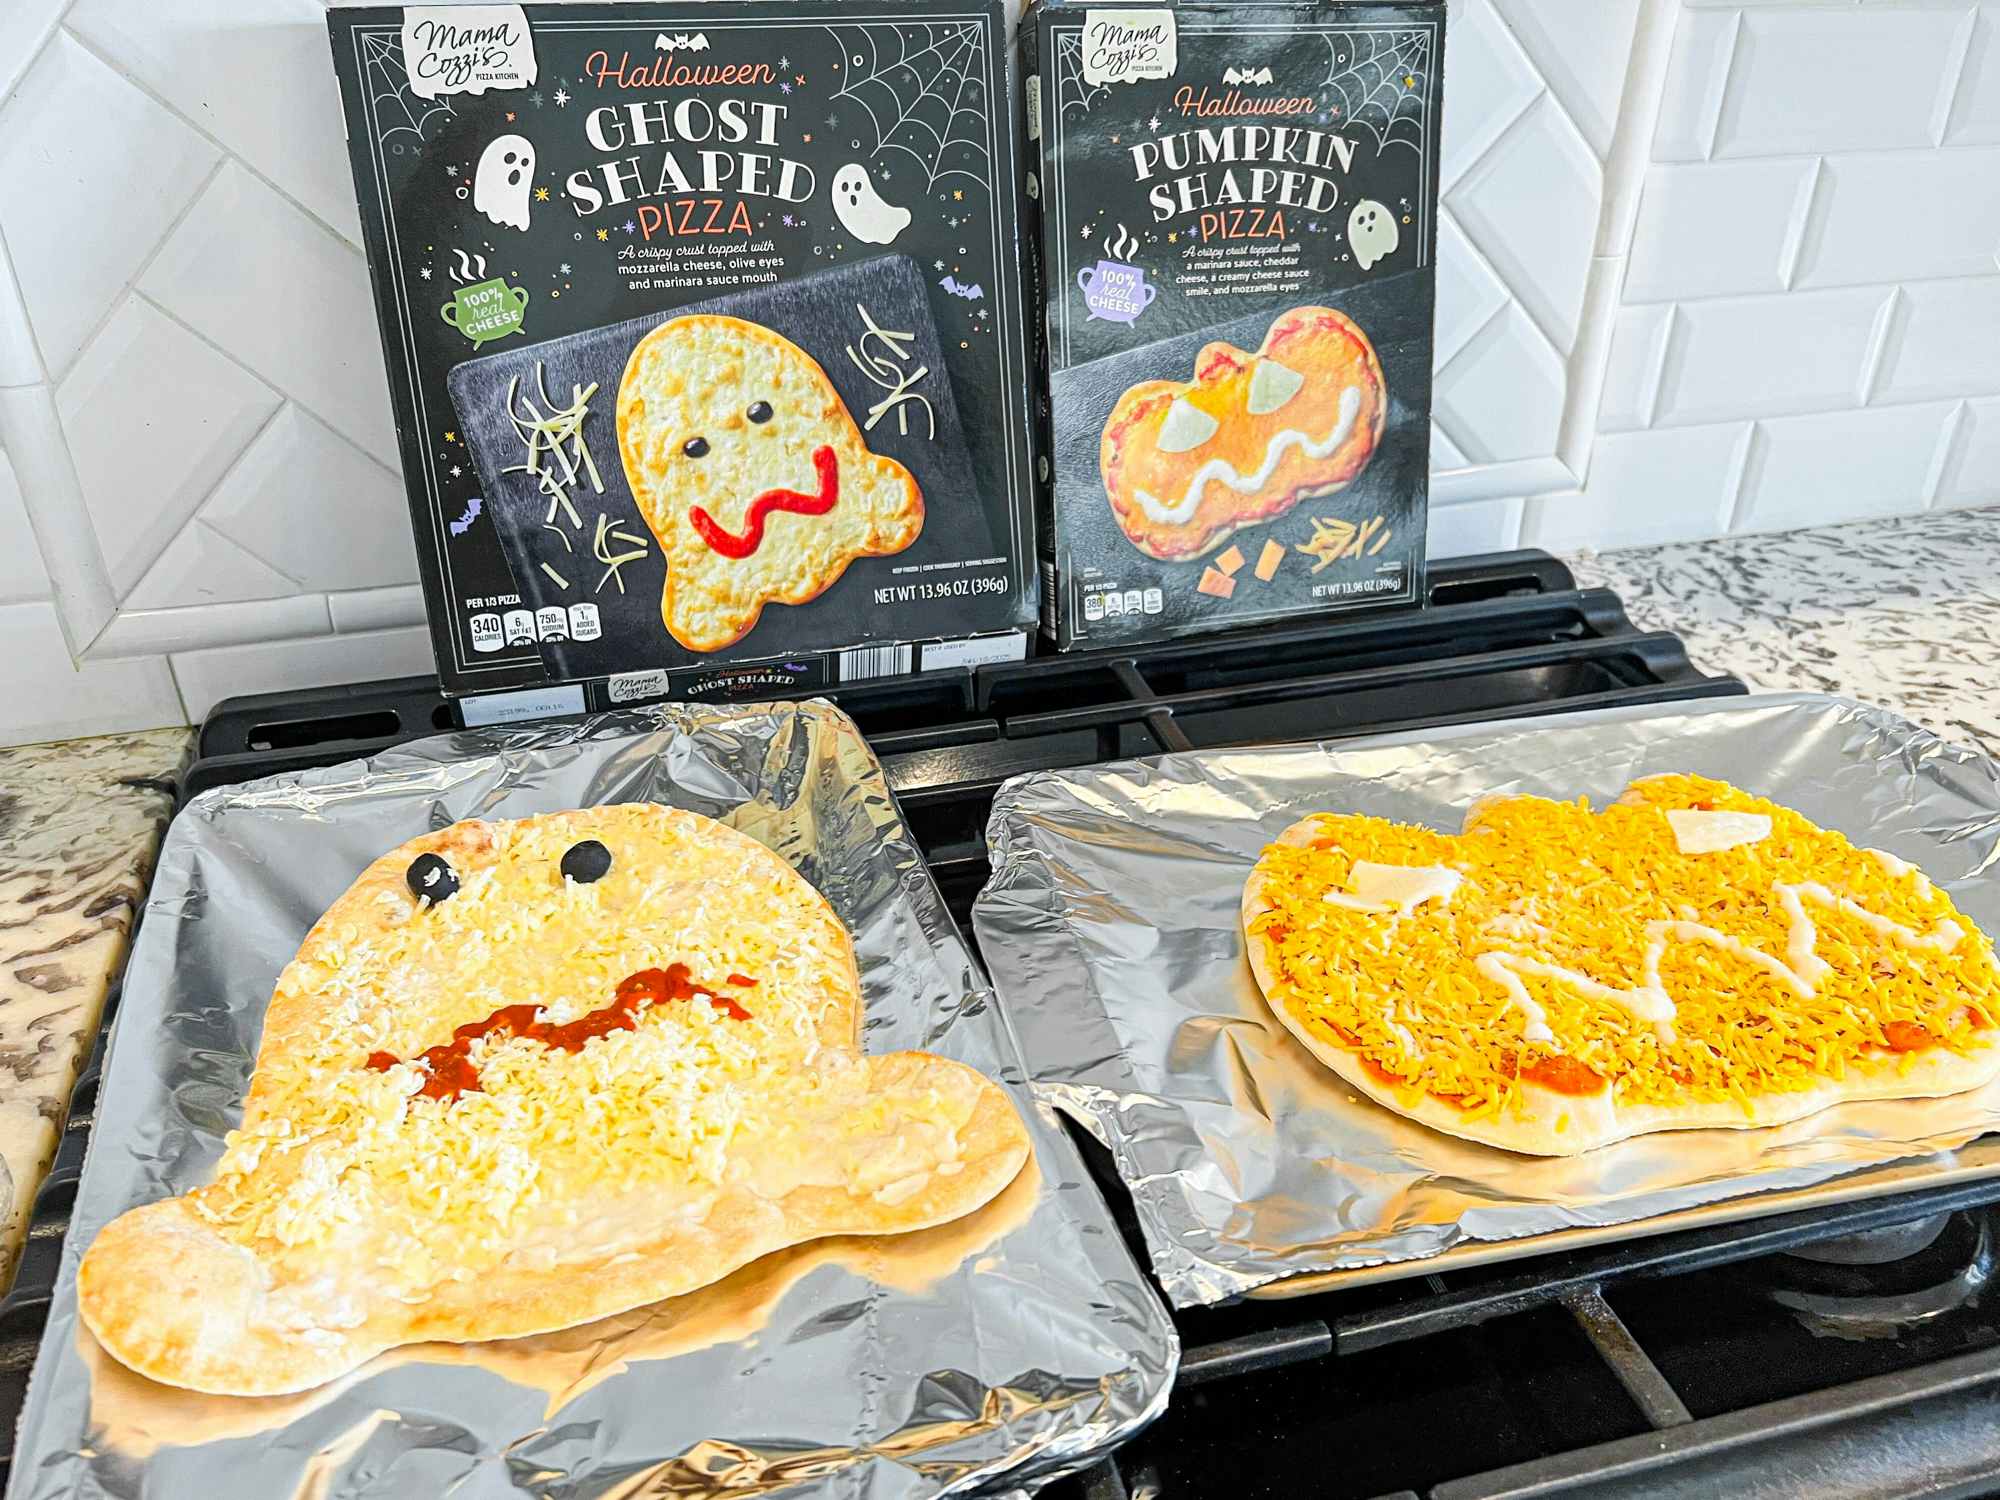 ghost and pumpkin shaped pizzas from Aldi